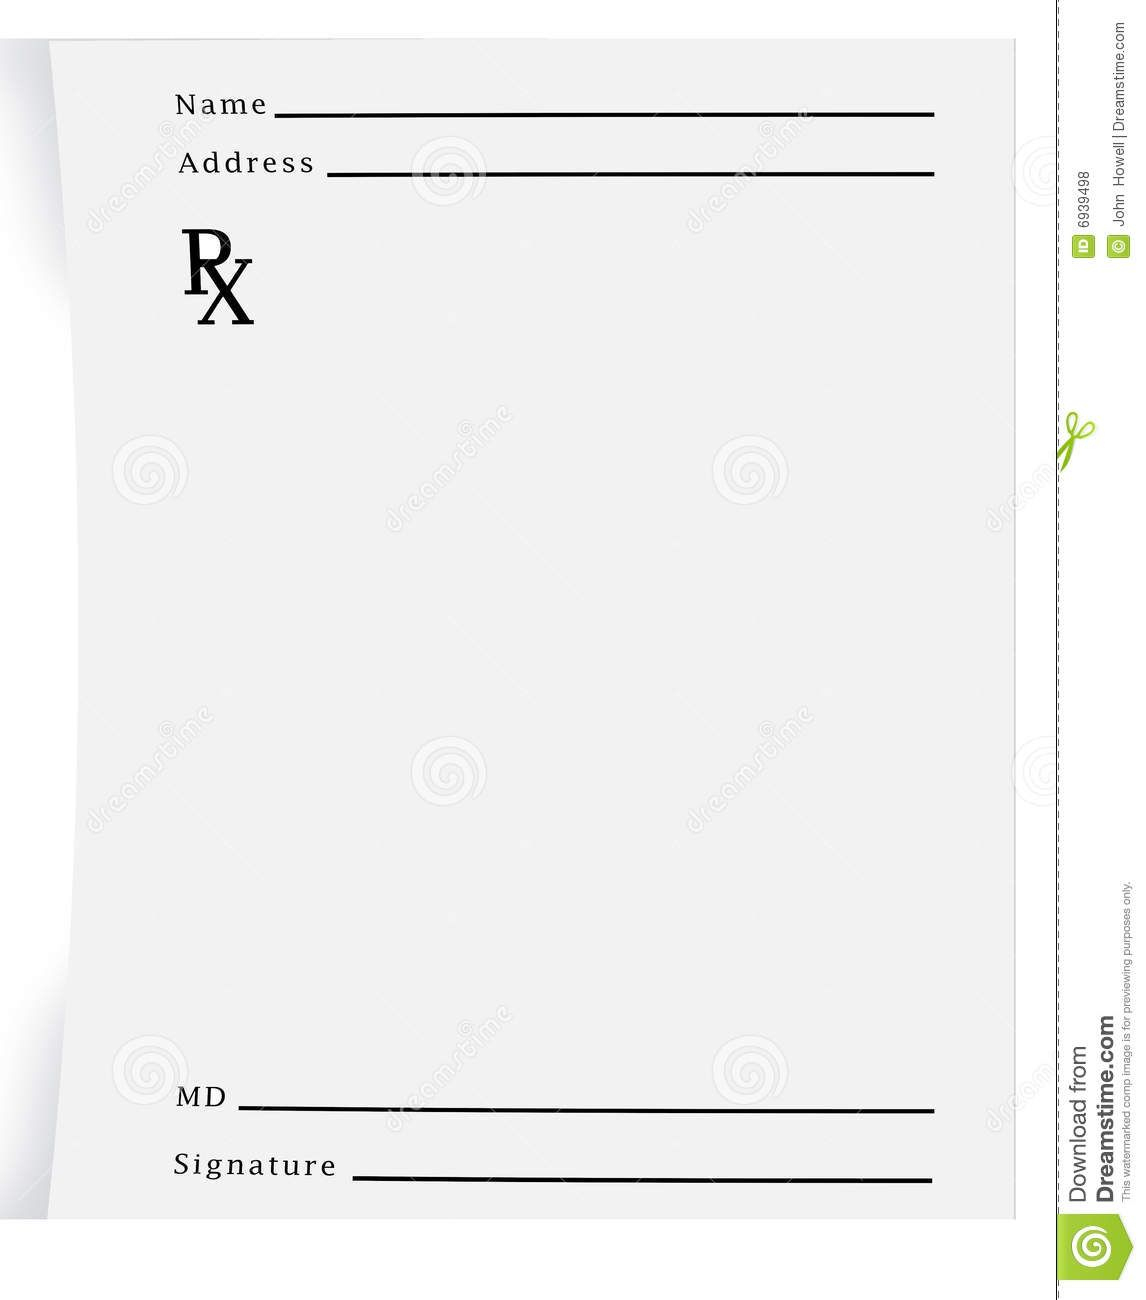 Prescription Pad Blank - Download From Over 27 Million High Quality - Free Printable Prescription Pad